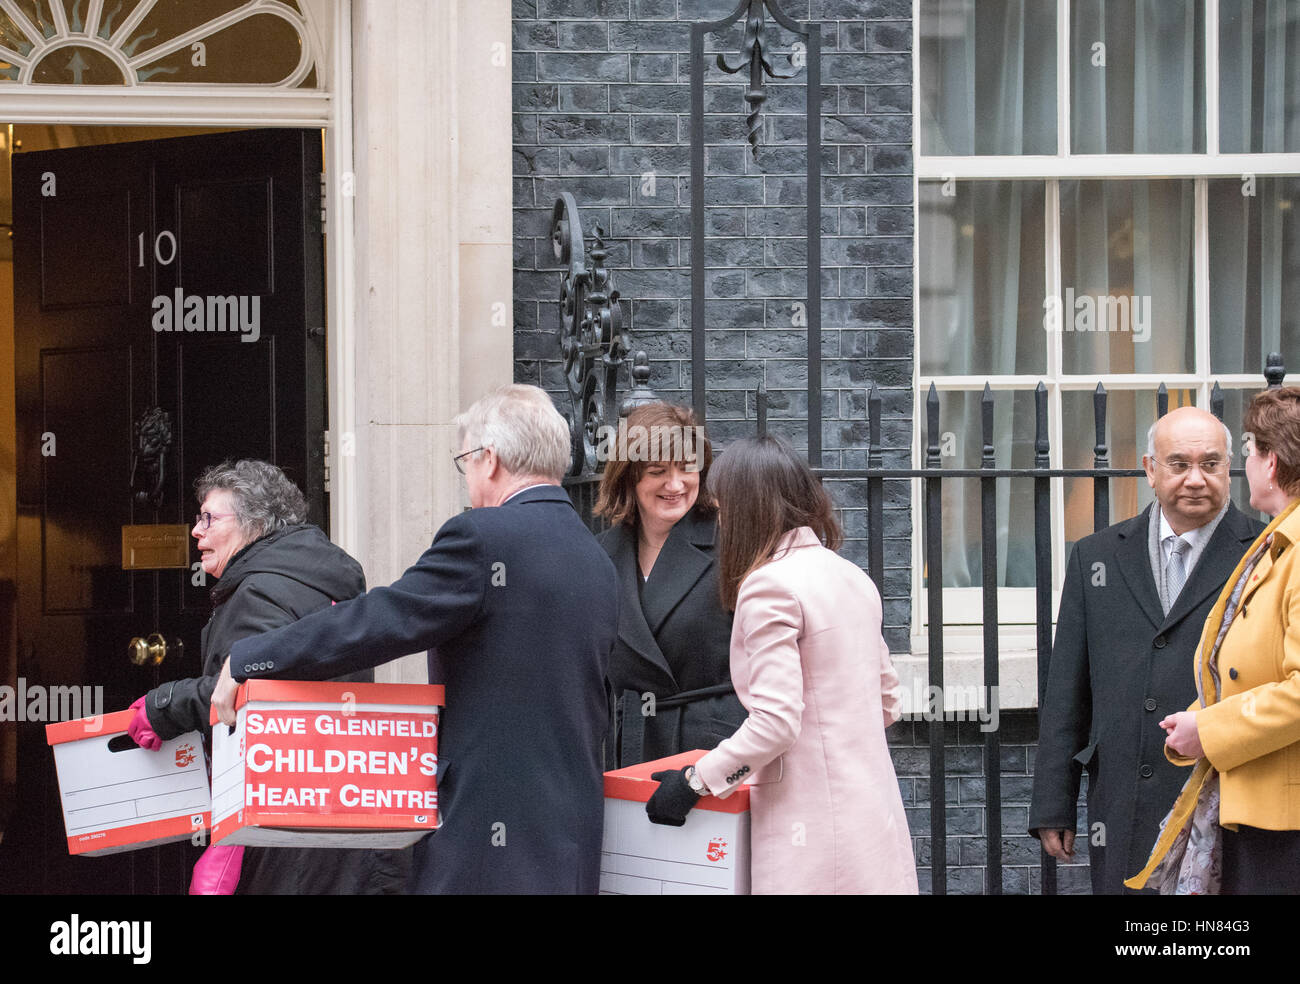 London, UK. 9th February 2017. Protesters hand a petition to 10 Downing Street against the closure of Glenfields Childrens Heart unit. MP Keith Vaz on the 2nd right of the picture Credit: Ian Davidson/Alamy Live News Stock Photo